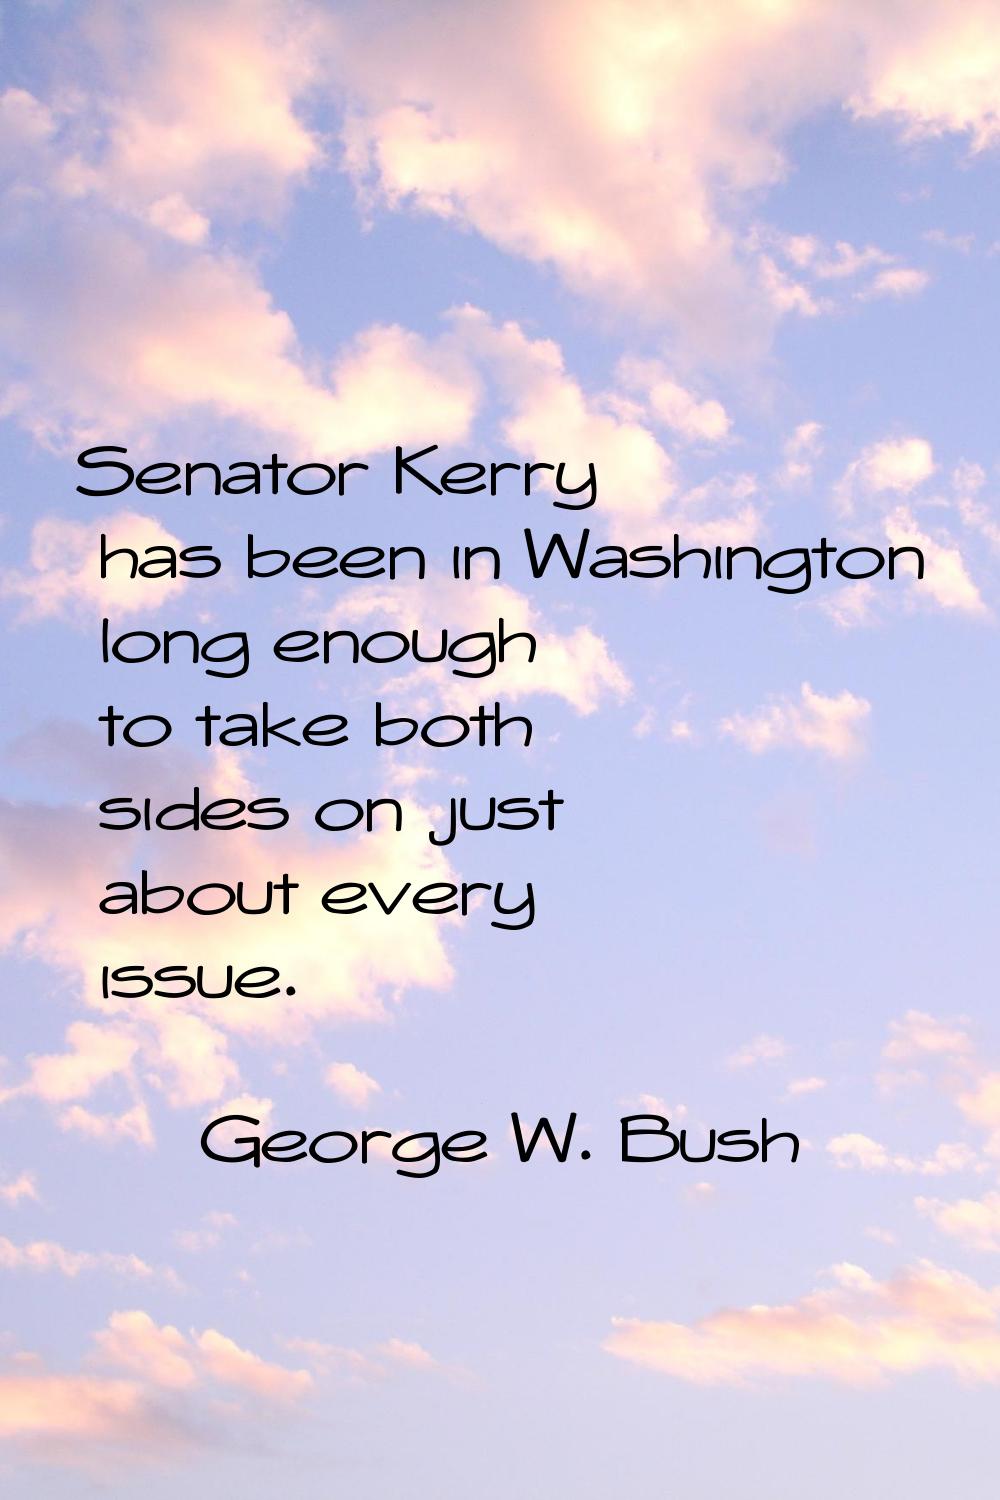 Senator Kerry has been in Washington long enough to take both sides on just about every issue.